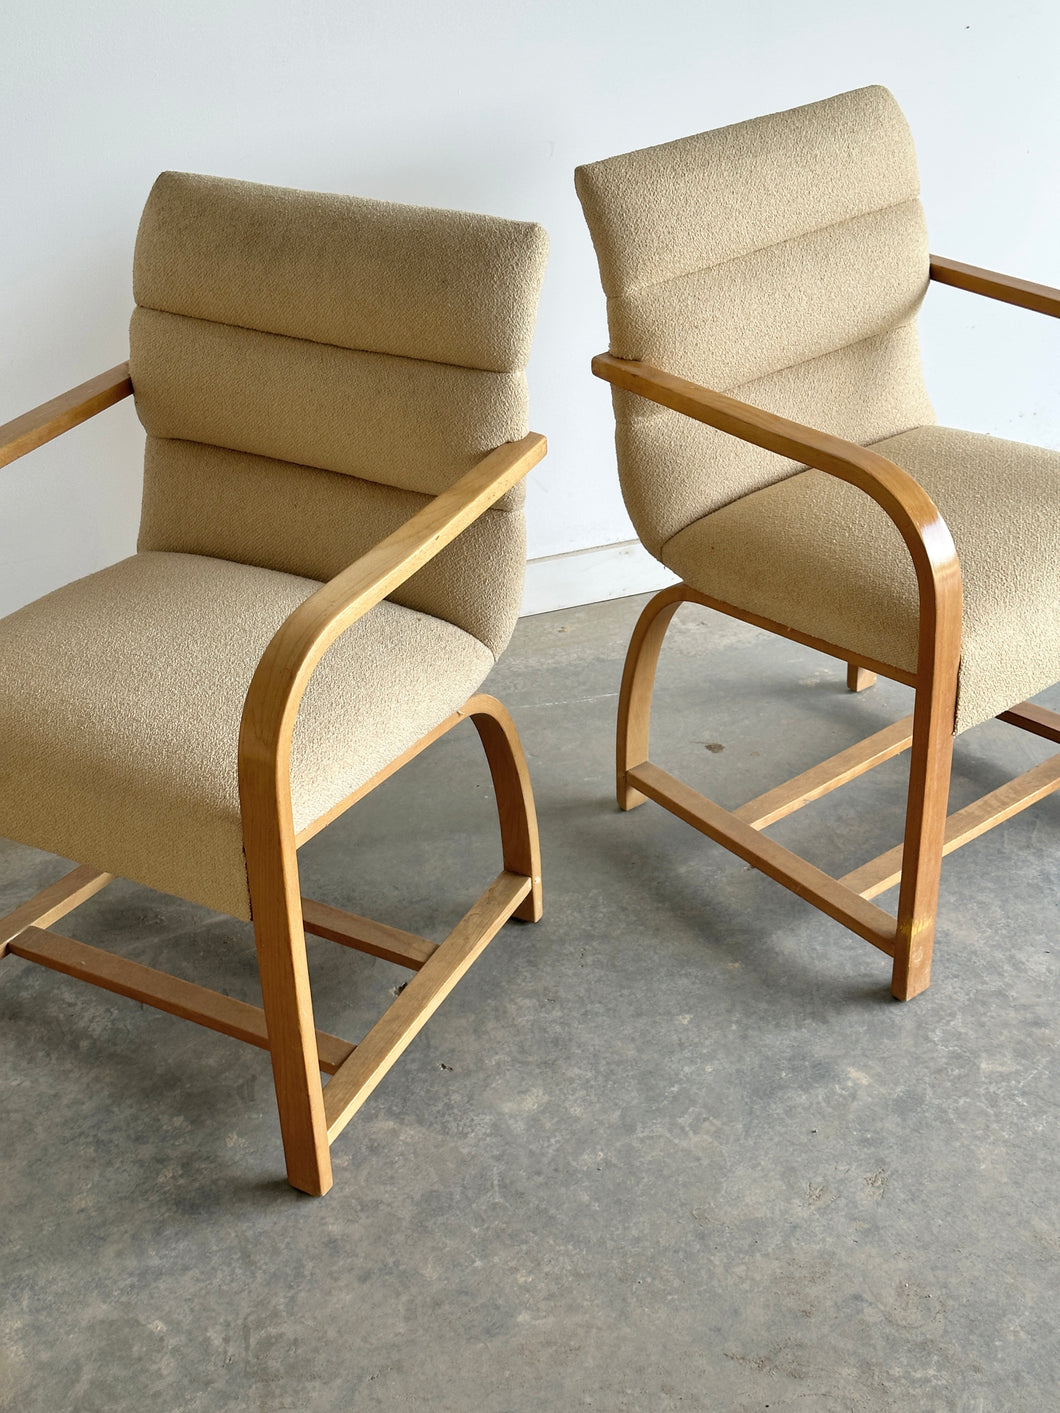 Art deco dining chairs by Gilbert Rohde